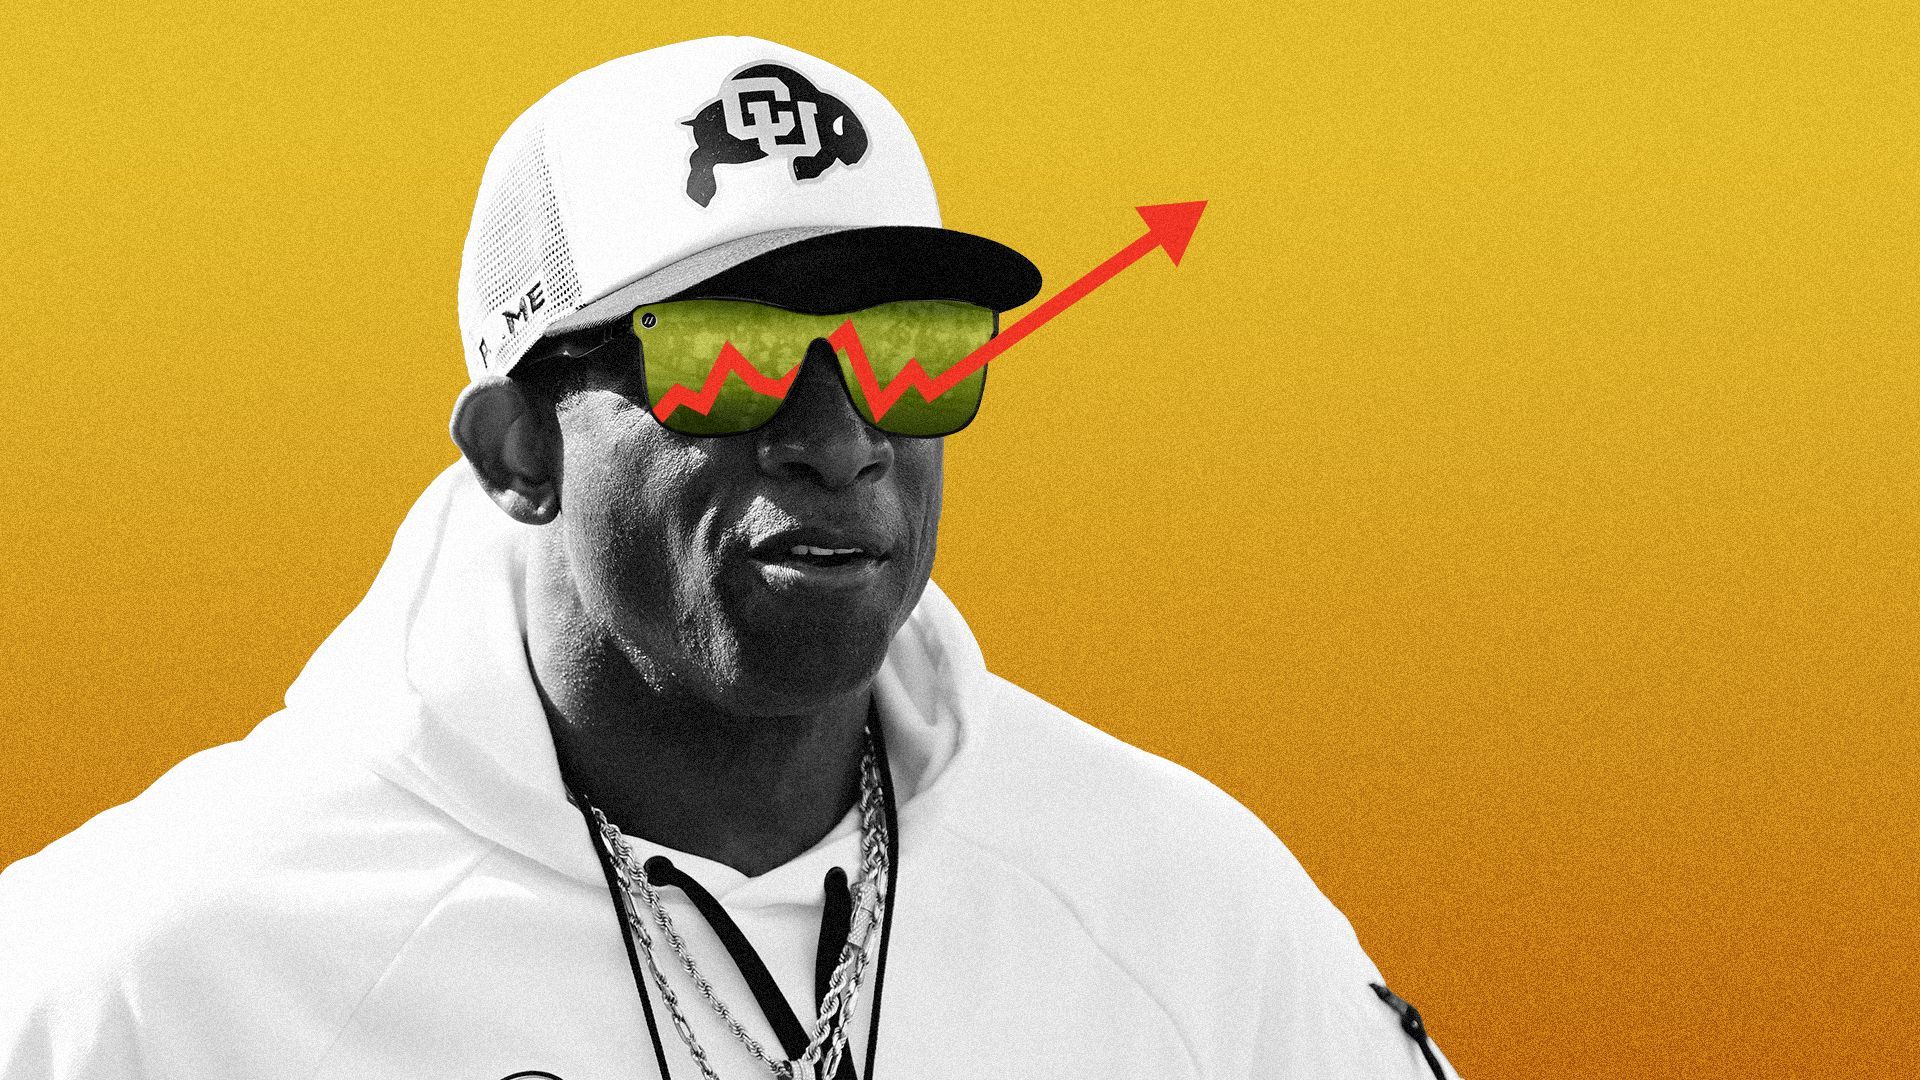 Photo illustration of an arrow rising out of Deion Sanders' sunglasses.